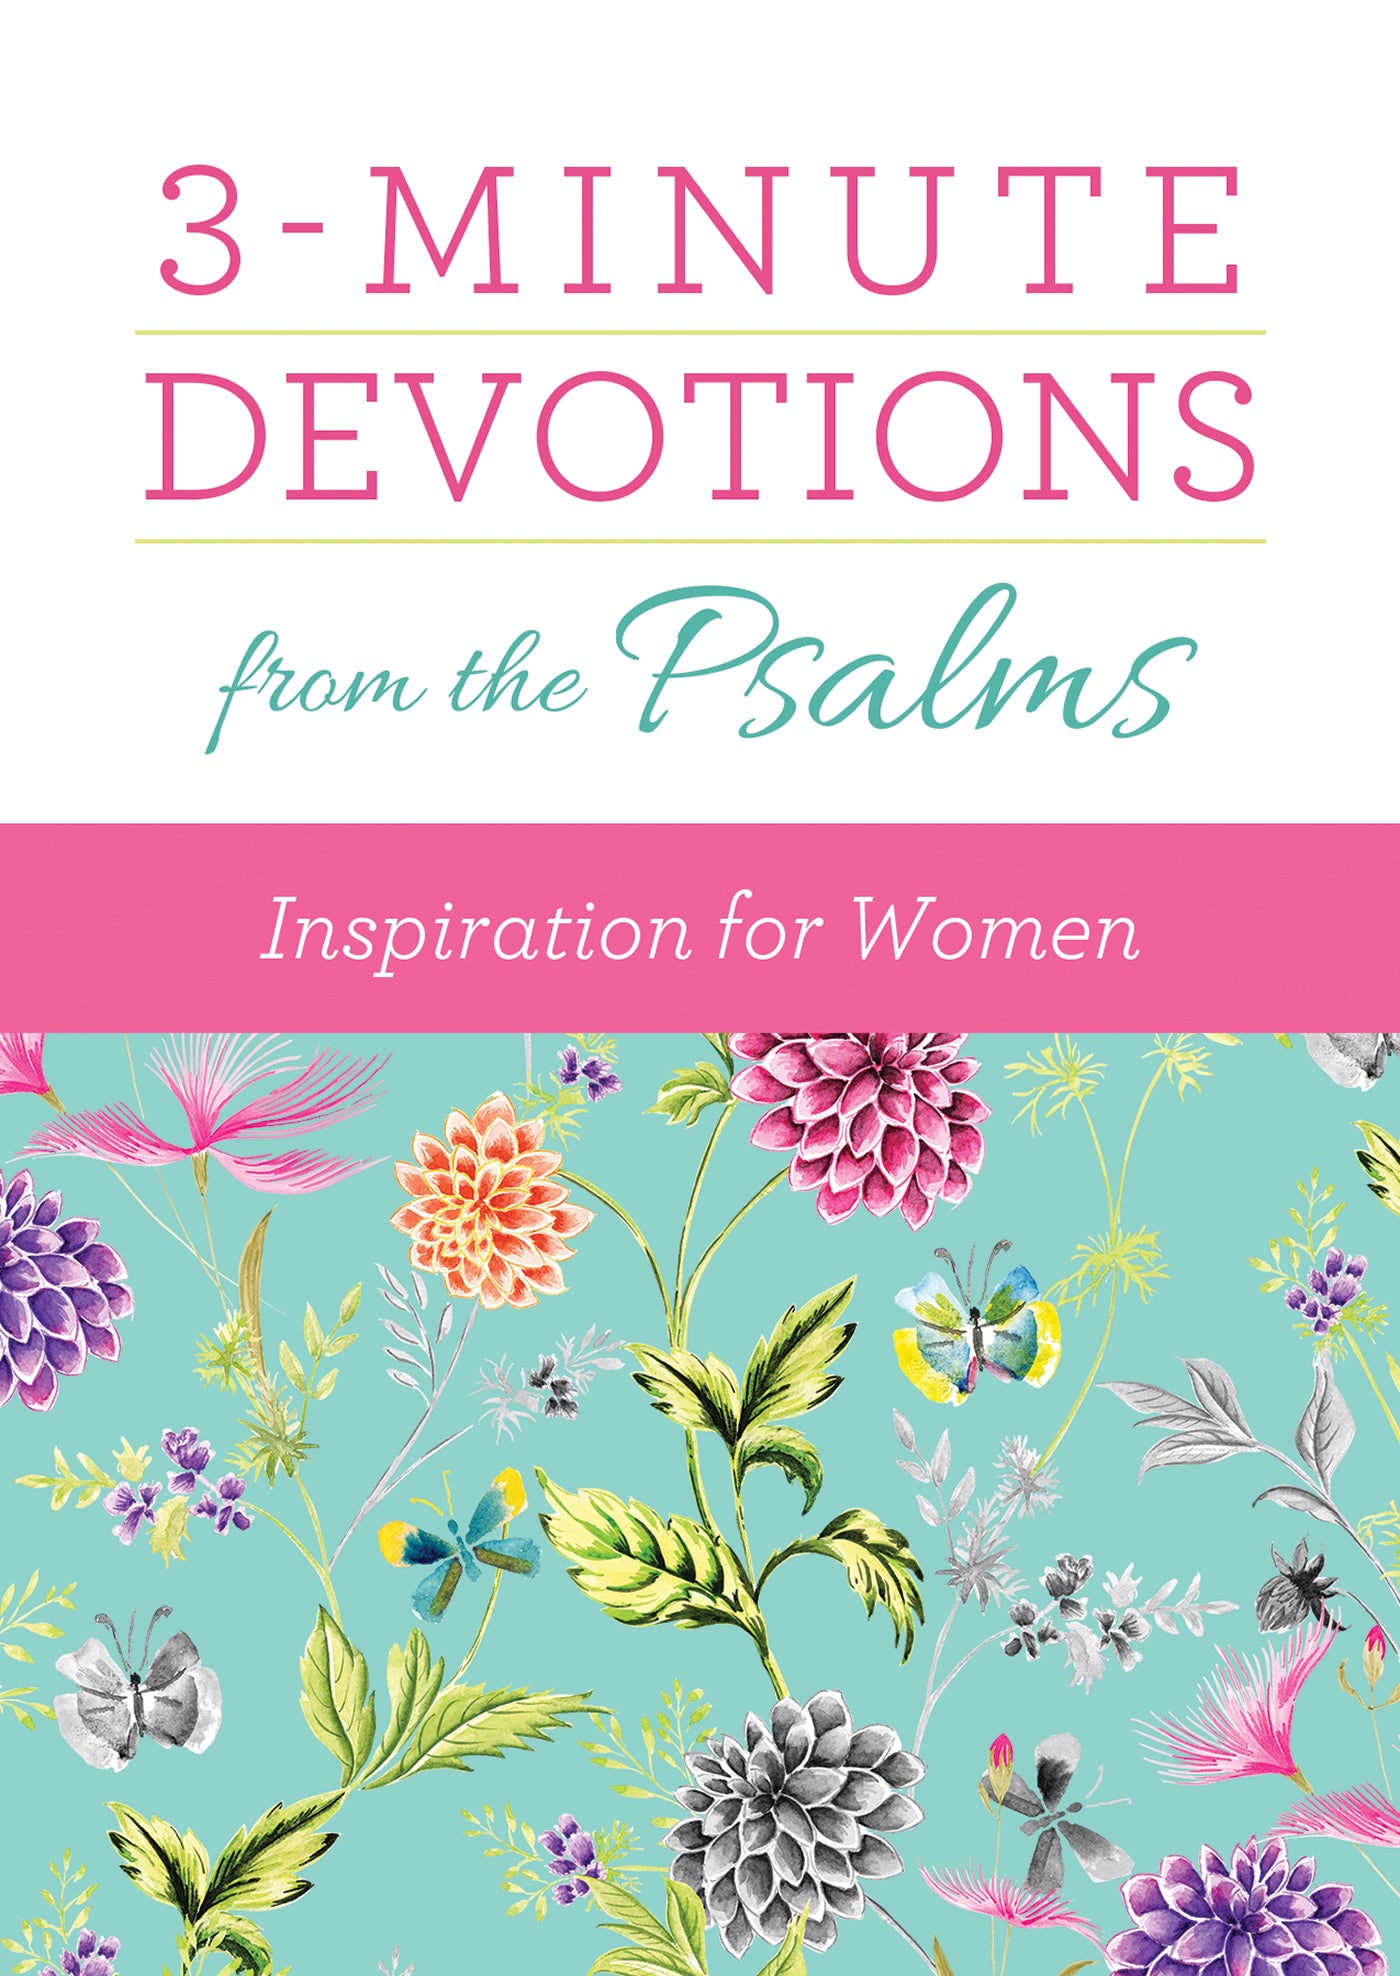 Image of 3-Minute Devotions from the Psalms: Inspiration for Women other